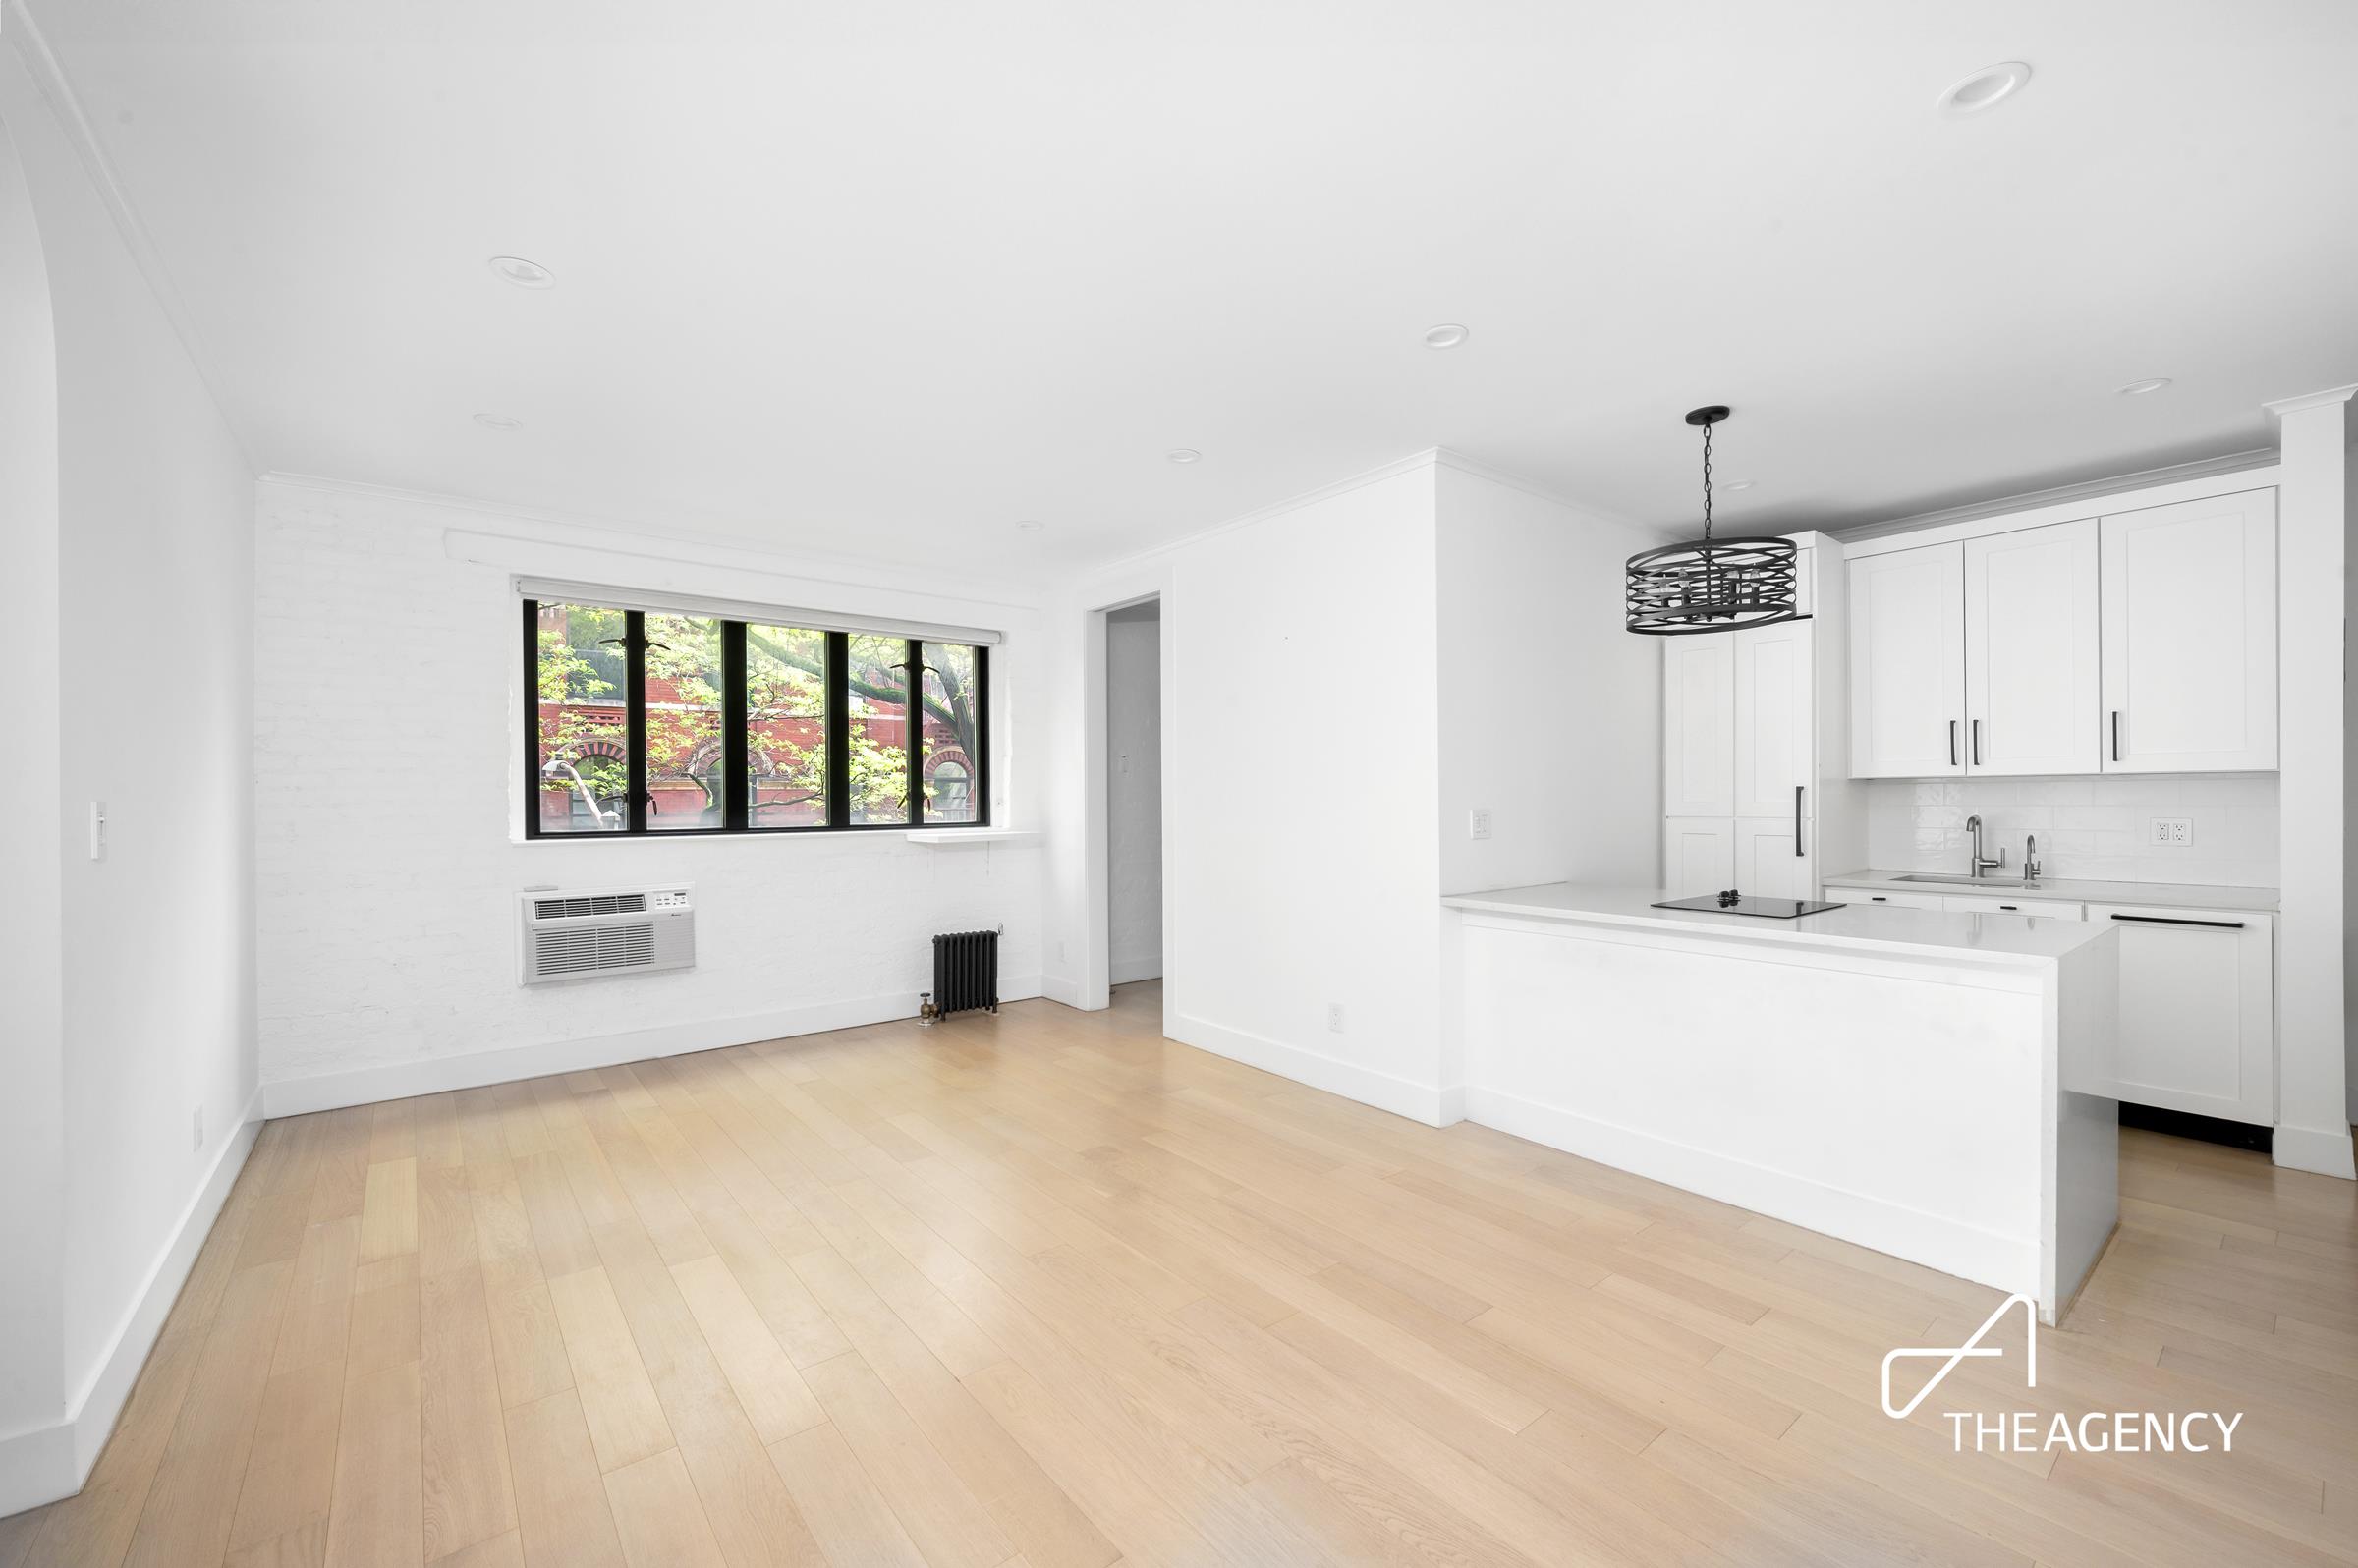 210 6th Avenue 3-G, Soho, Downtown, NYC - 1 Bedrooms  
1 Bathrooms  
3 Rooms - 